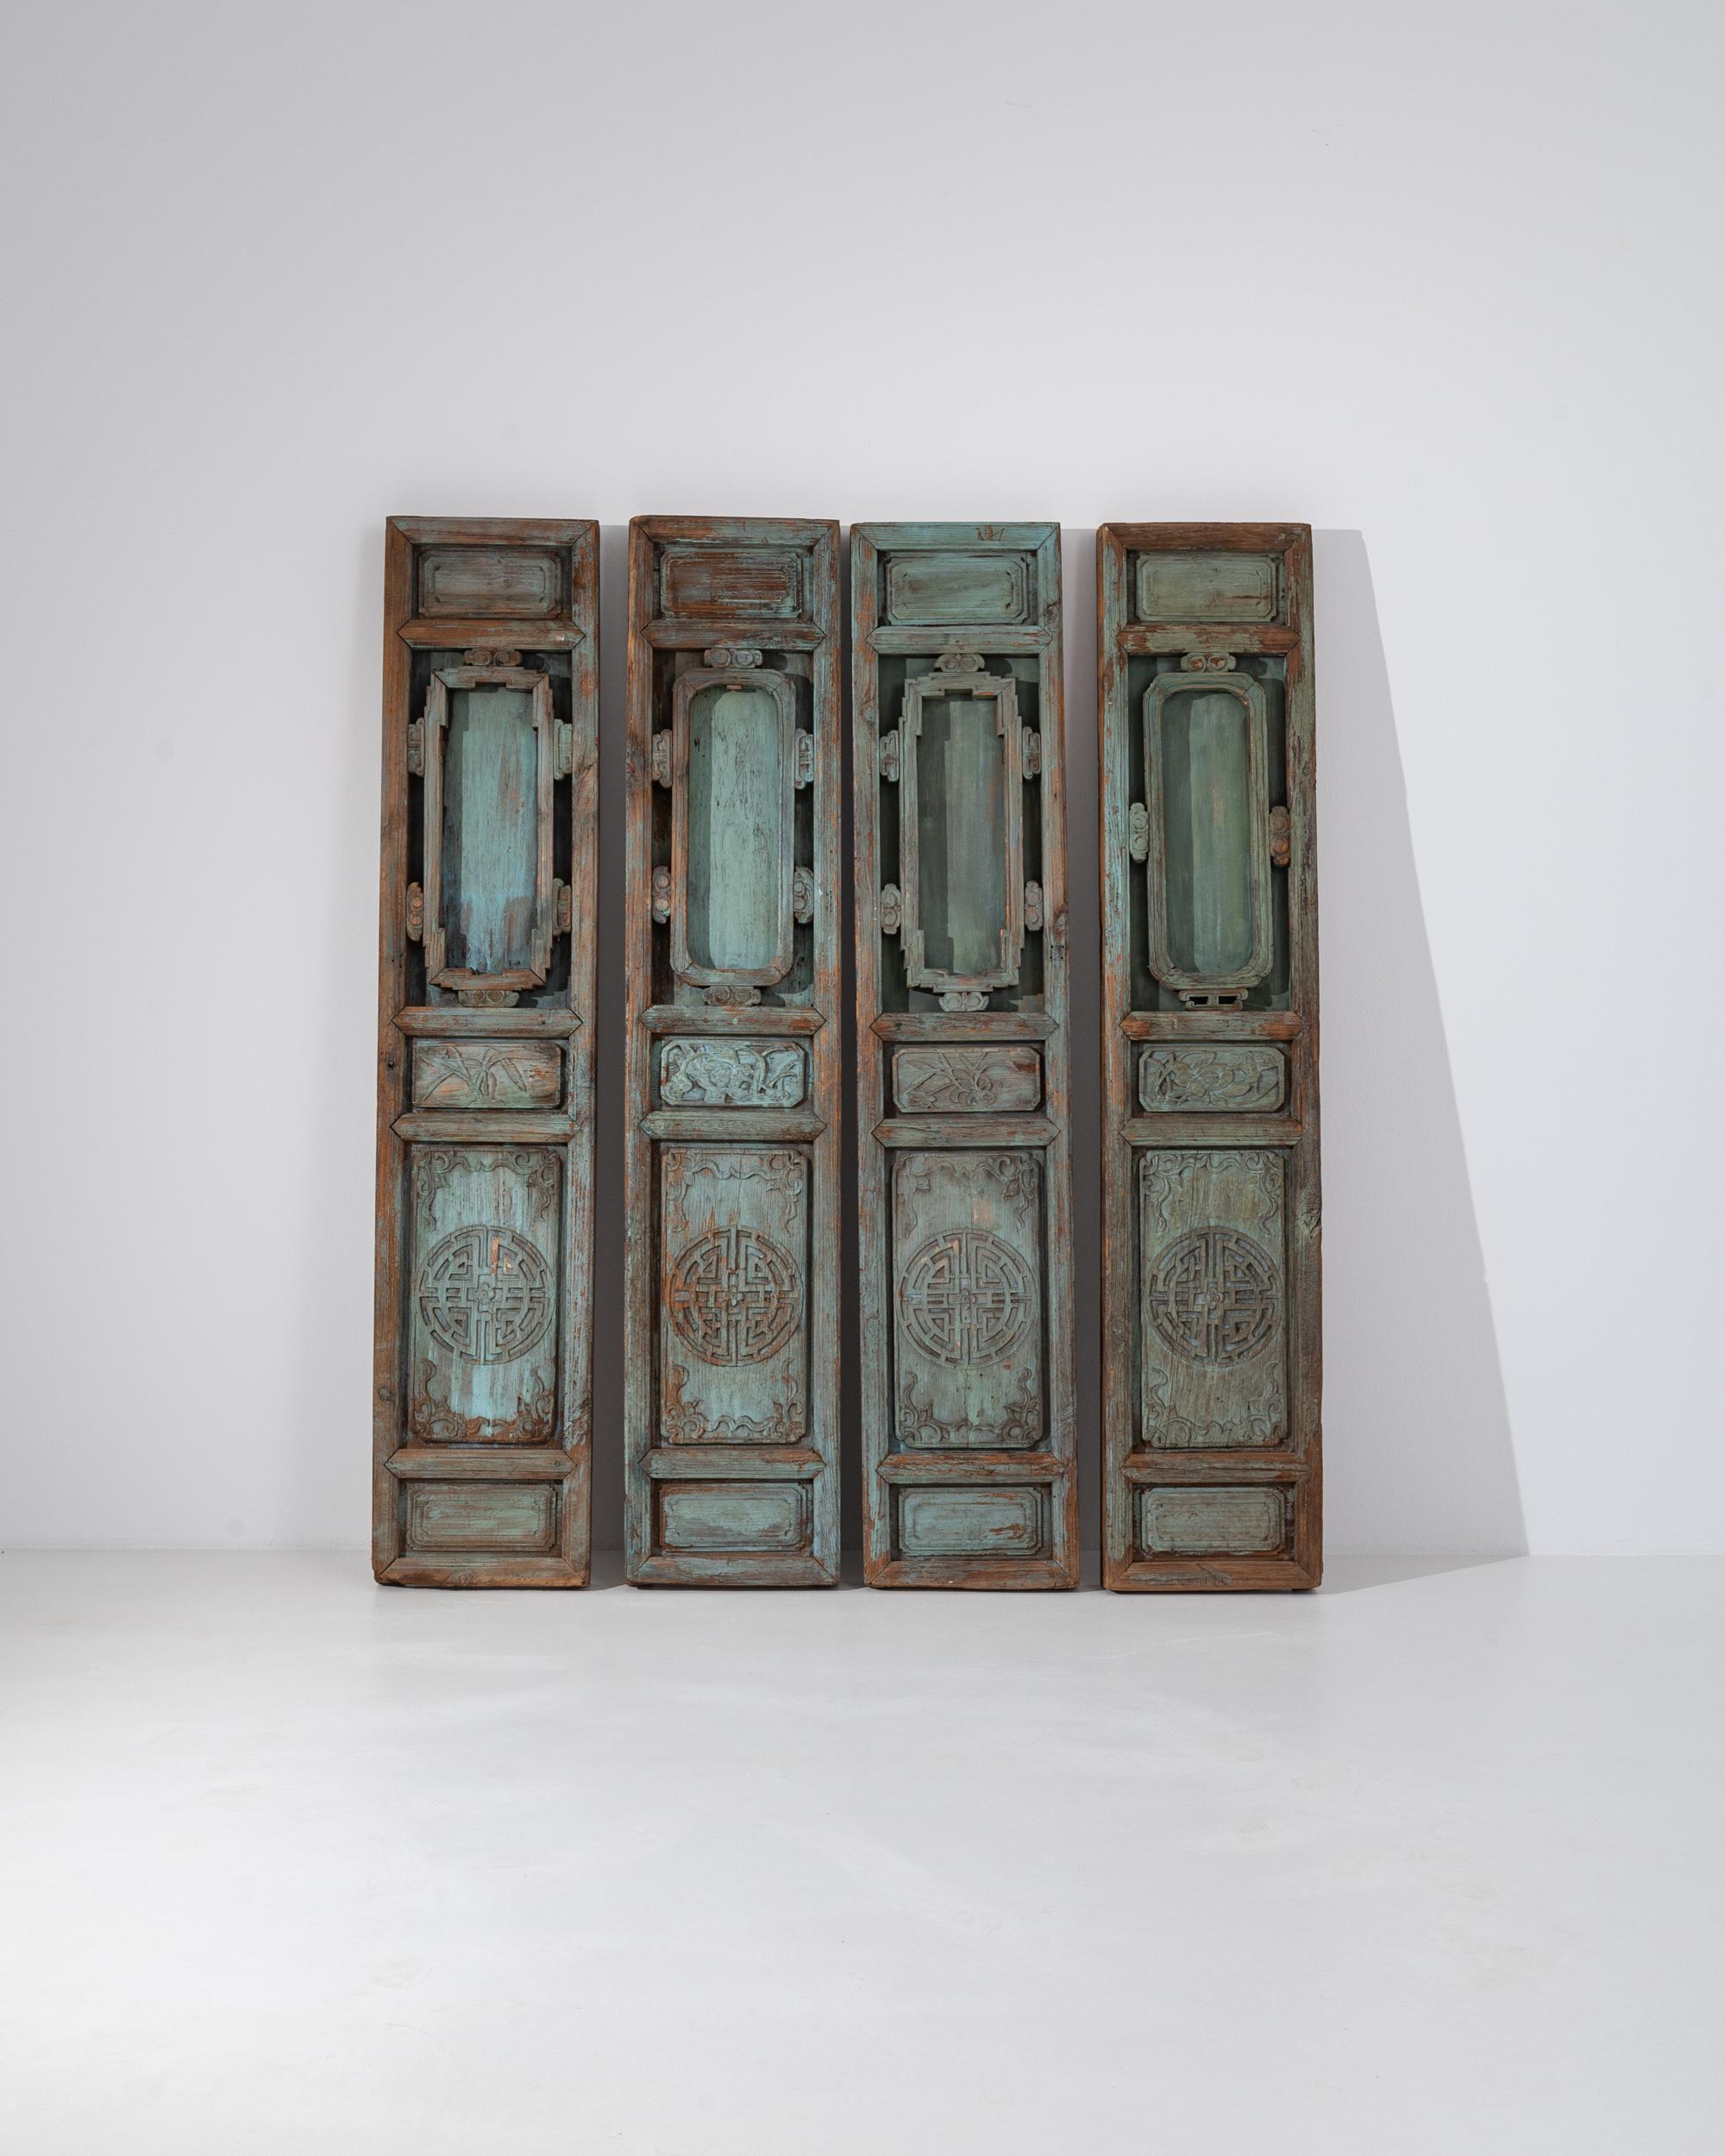 A set of 19th century decorative wooden doors from China. These tall sculptural panels rest with a pensive, contemplative aura. Beautifully carved floral motifs are framed above a mandala pattern, which is complete with a lotus flower in its center.